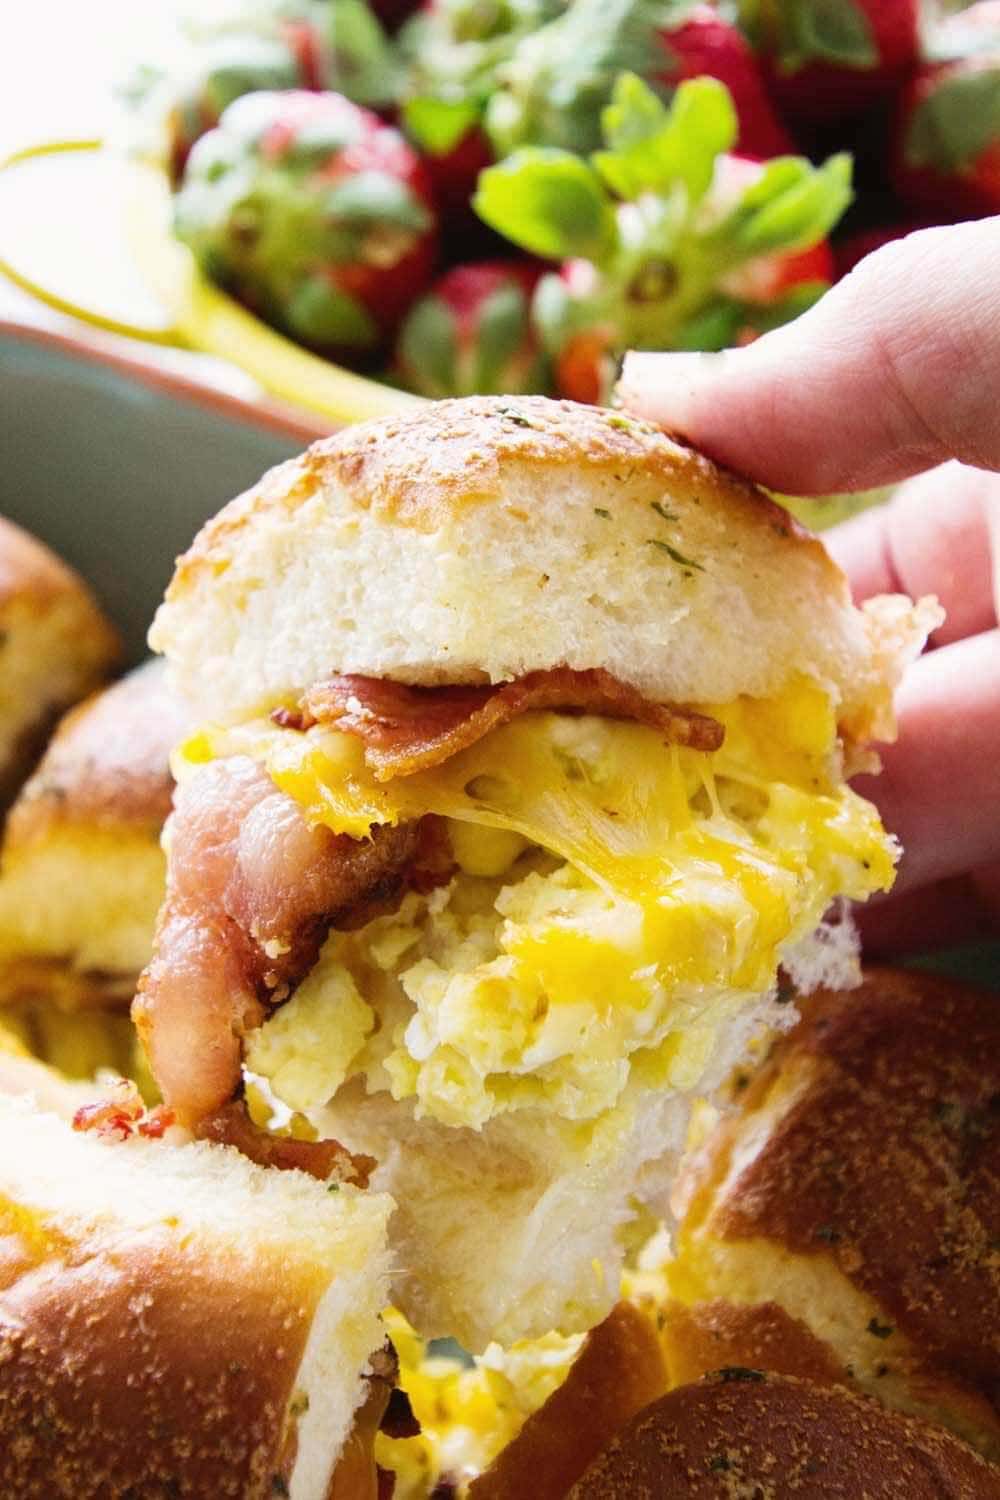 Cheesy Bacon Egg Breakfast Sliders ~ Delicious Slider Sandwiches Stuffed with Bacon, Scrambled Eggs and Cheese! The Perfect Easy Breakfast or Brunch Recipe!